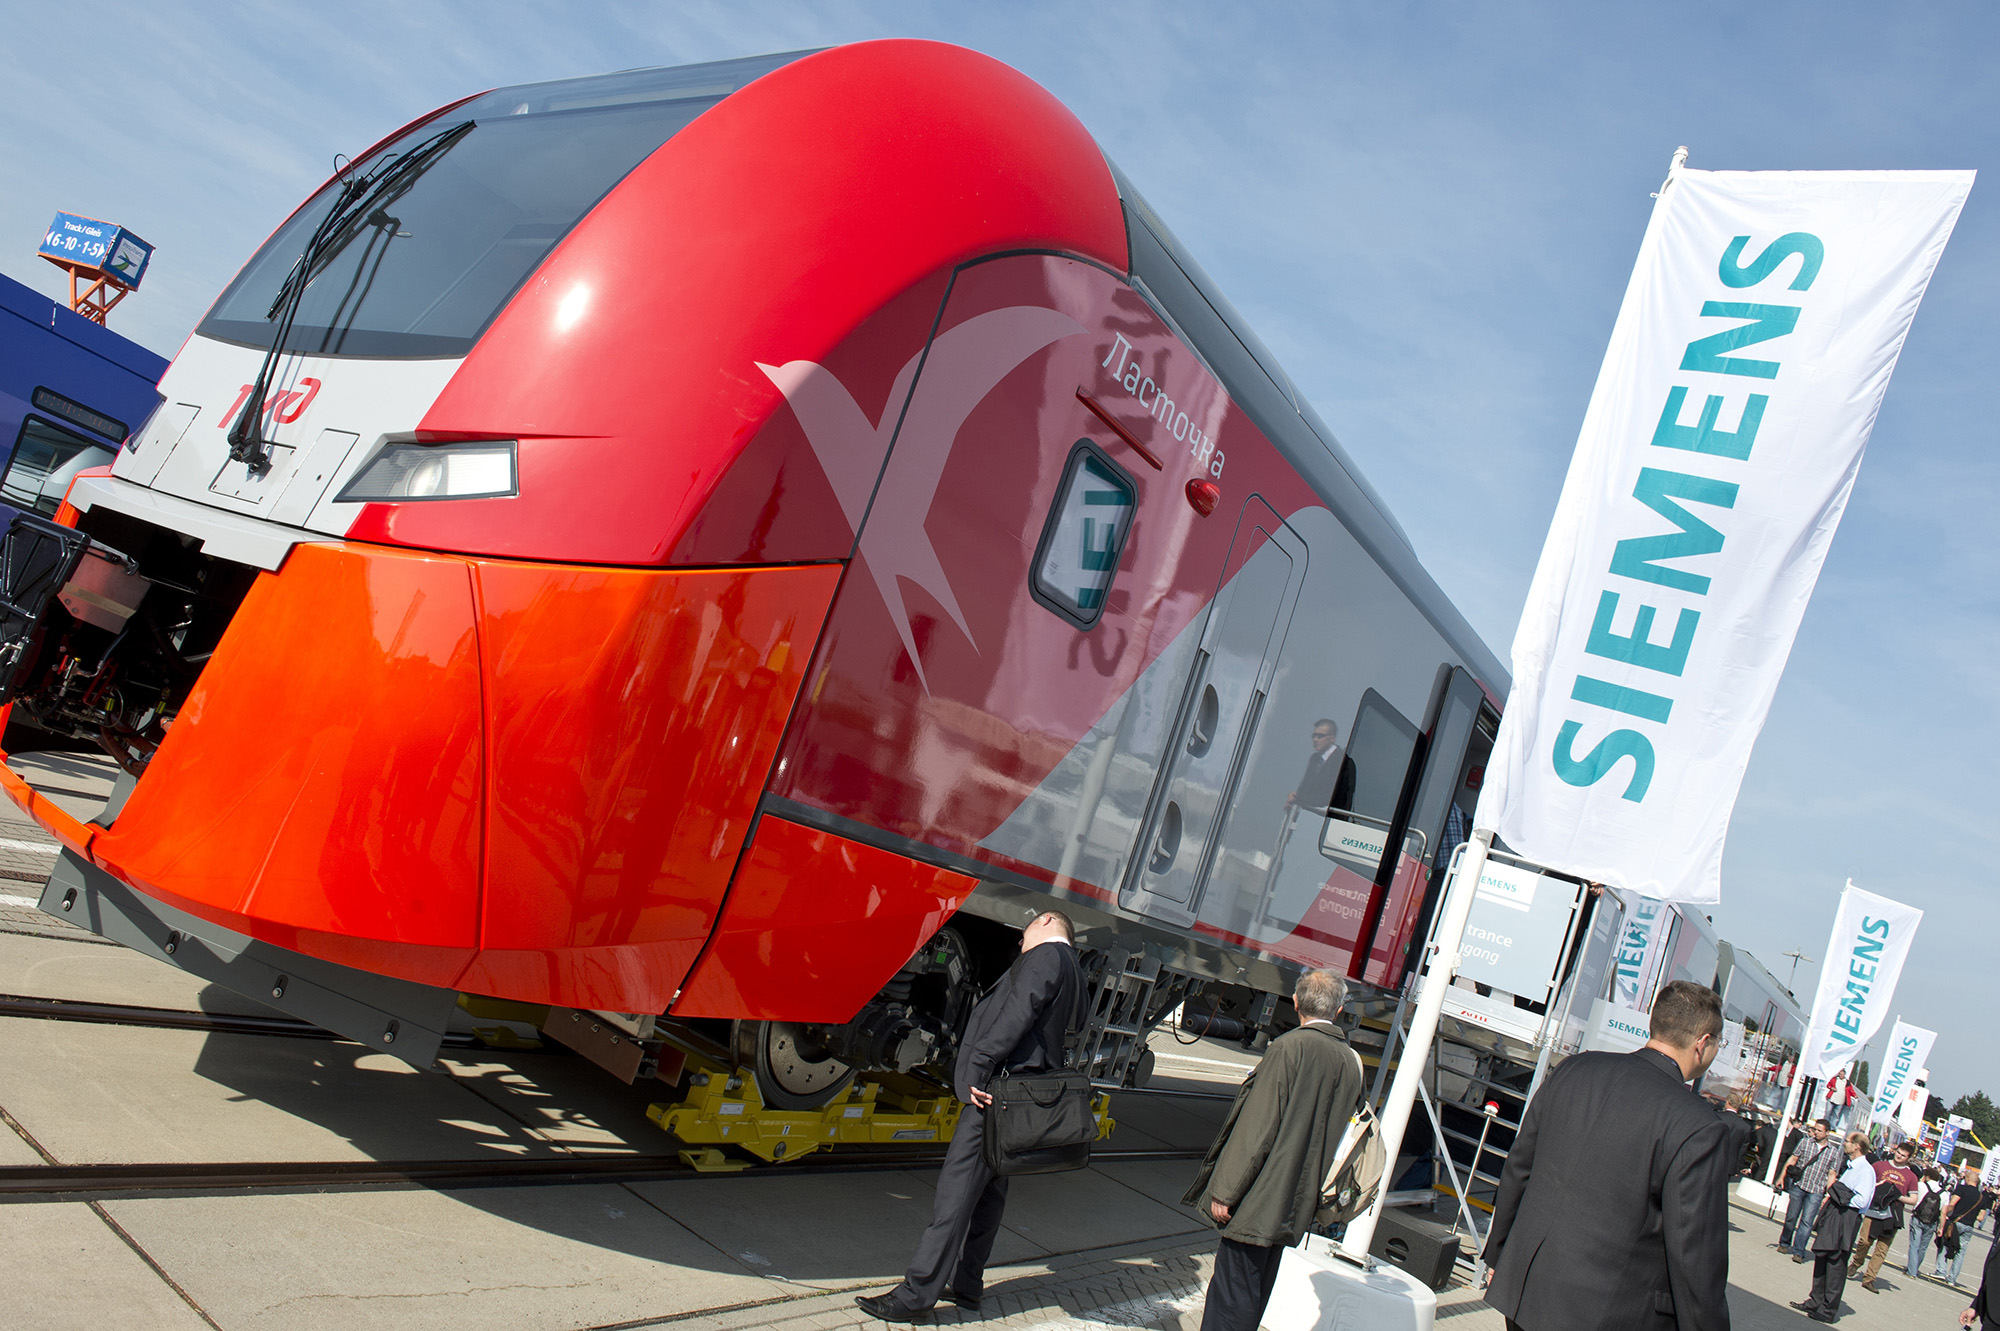 A Russian railways Desiro train by Siemens is on display at the Innotrans 2012 International Trade Fair for Transport and Mobility in Berlin September 18, 2012. Russian railways ordered 38 Desiro vehicles for the 2014 Sochi Winter Olympics.